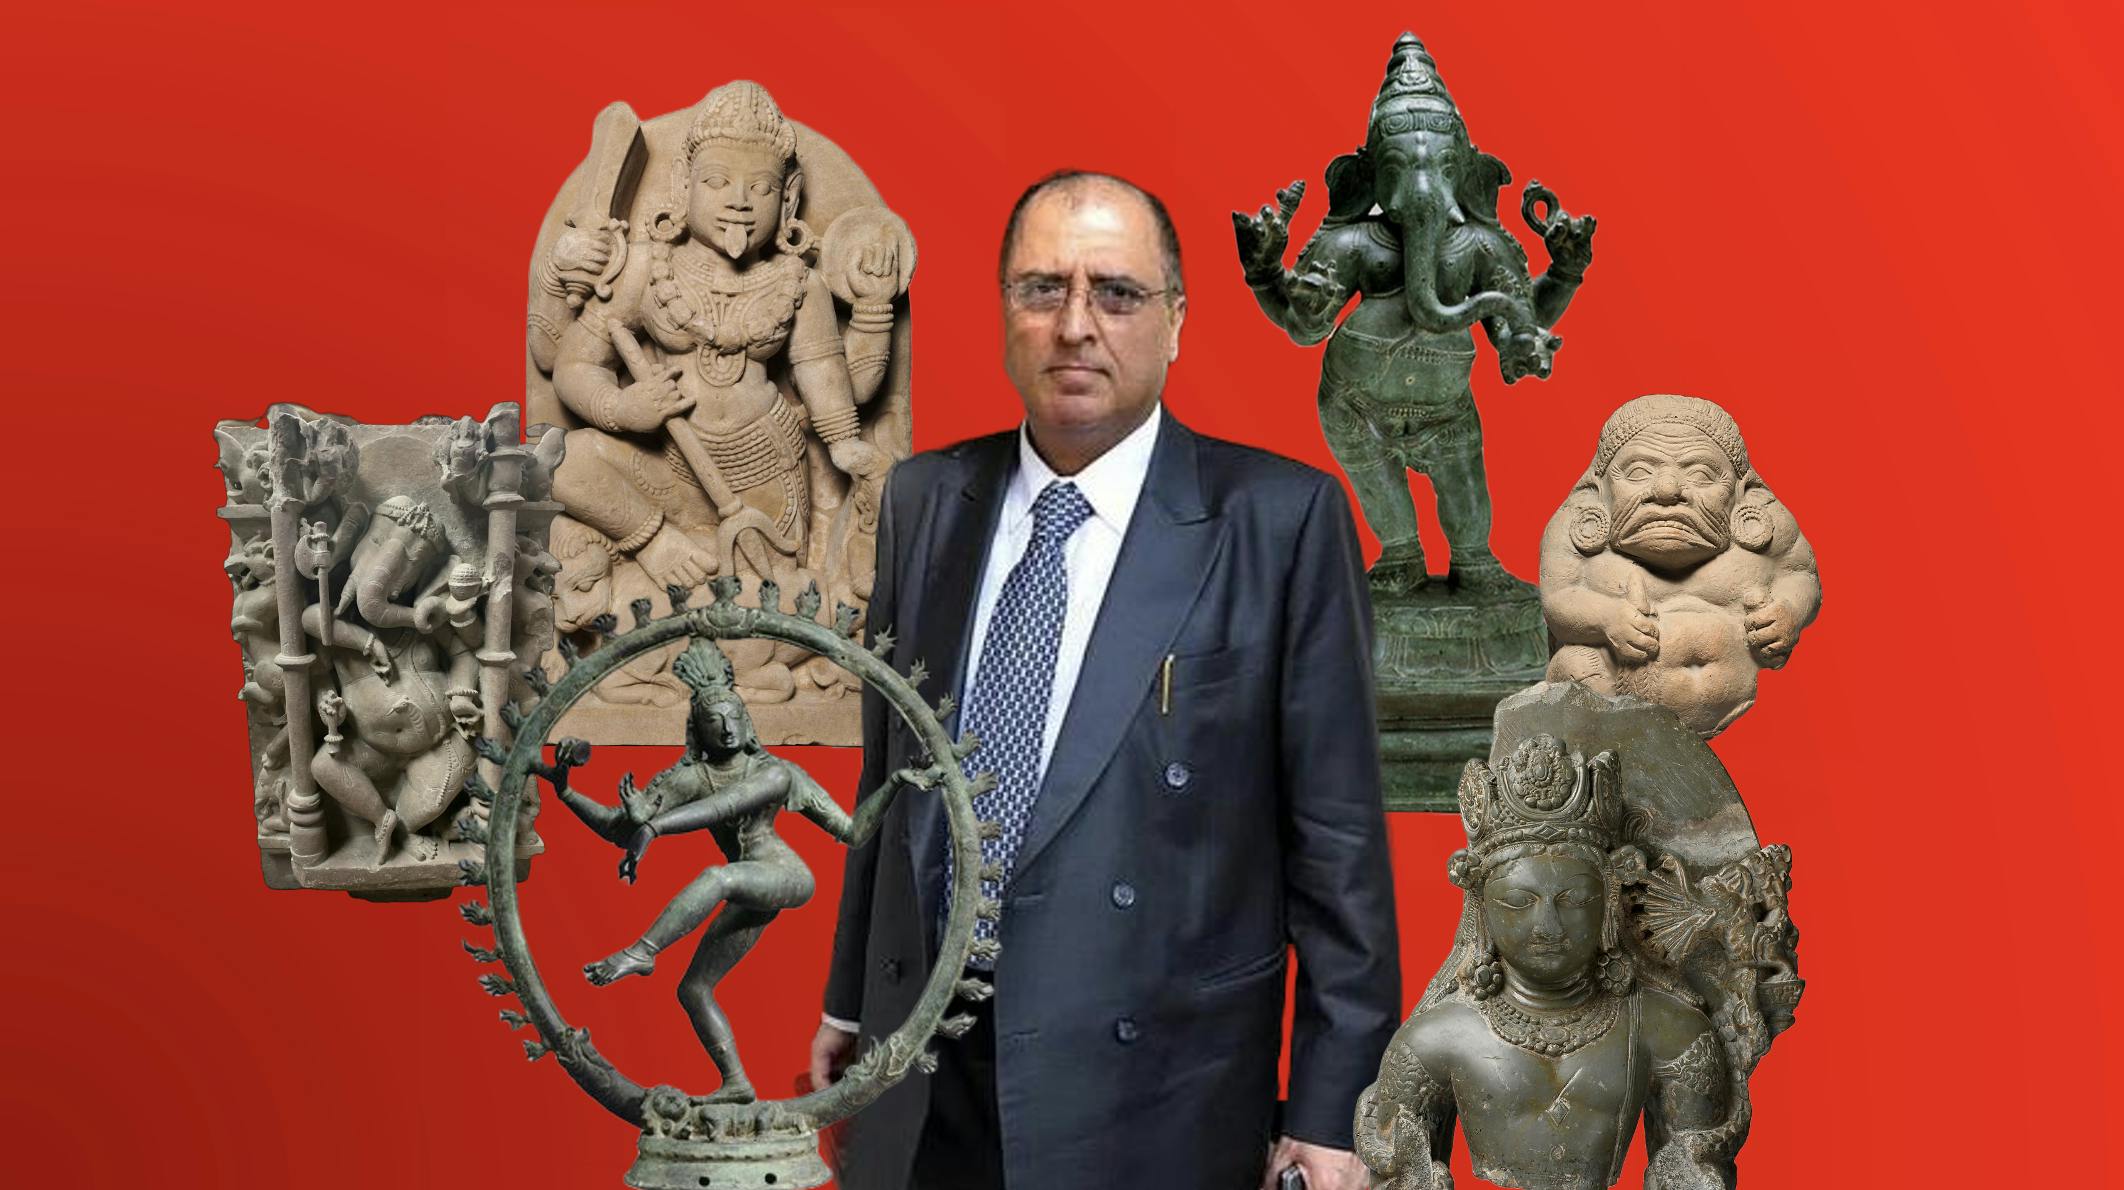 Subhash Kapoor: Art Dealer by Day, Idol Thief By Night